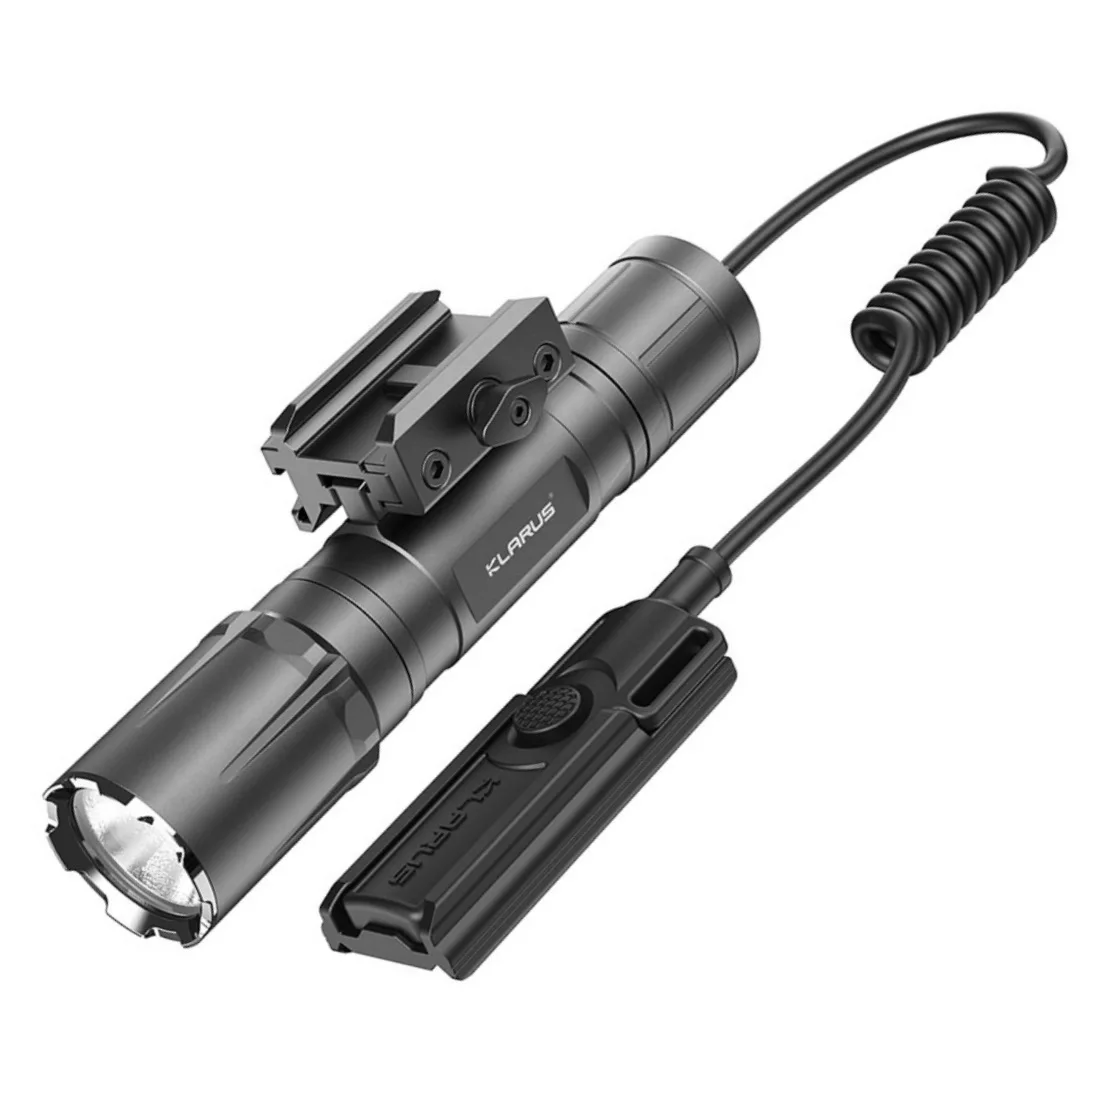 Klarus GL4 Torch Light Rechargeable Tactical Flashlight 3300LM with Removable Slide Rail Mount and Remote Switch + 21700 Battery